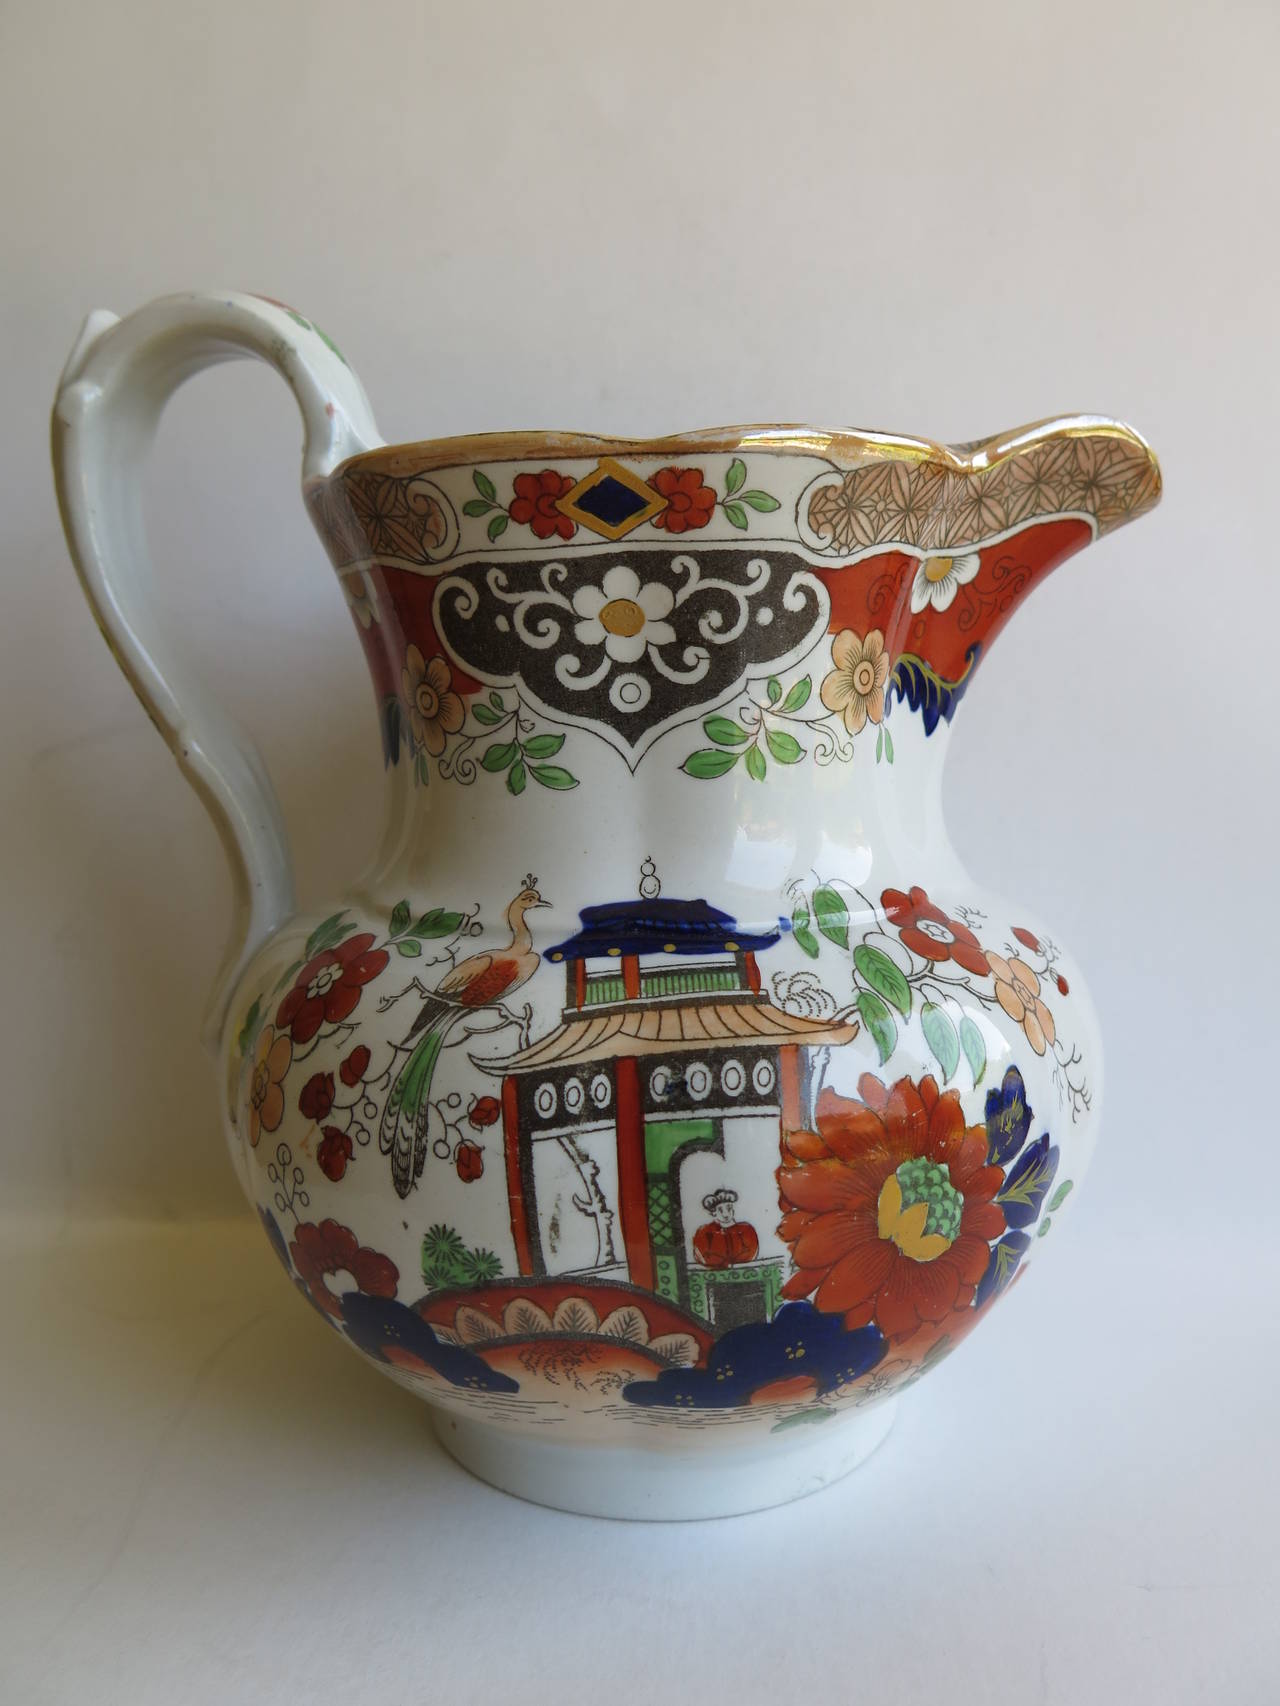 Hand-Painted 19th Century Mason's 'Ashworths' Ironstone, Jug or Pitcher, Chinoiserie Pat'n